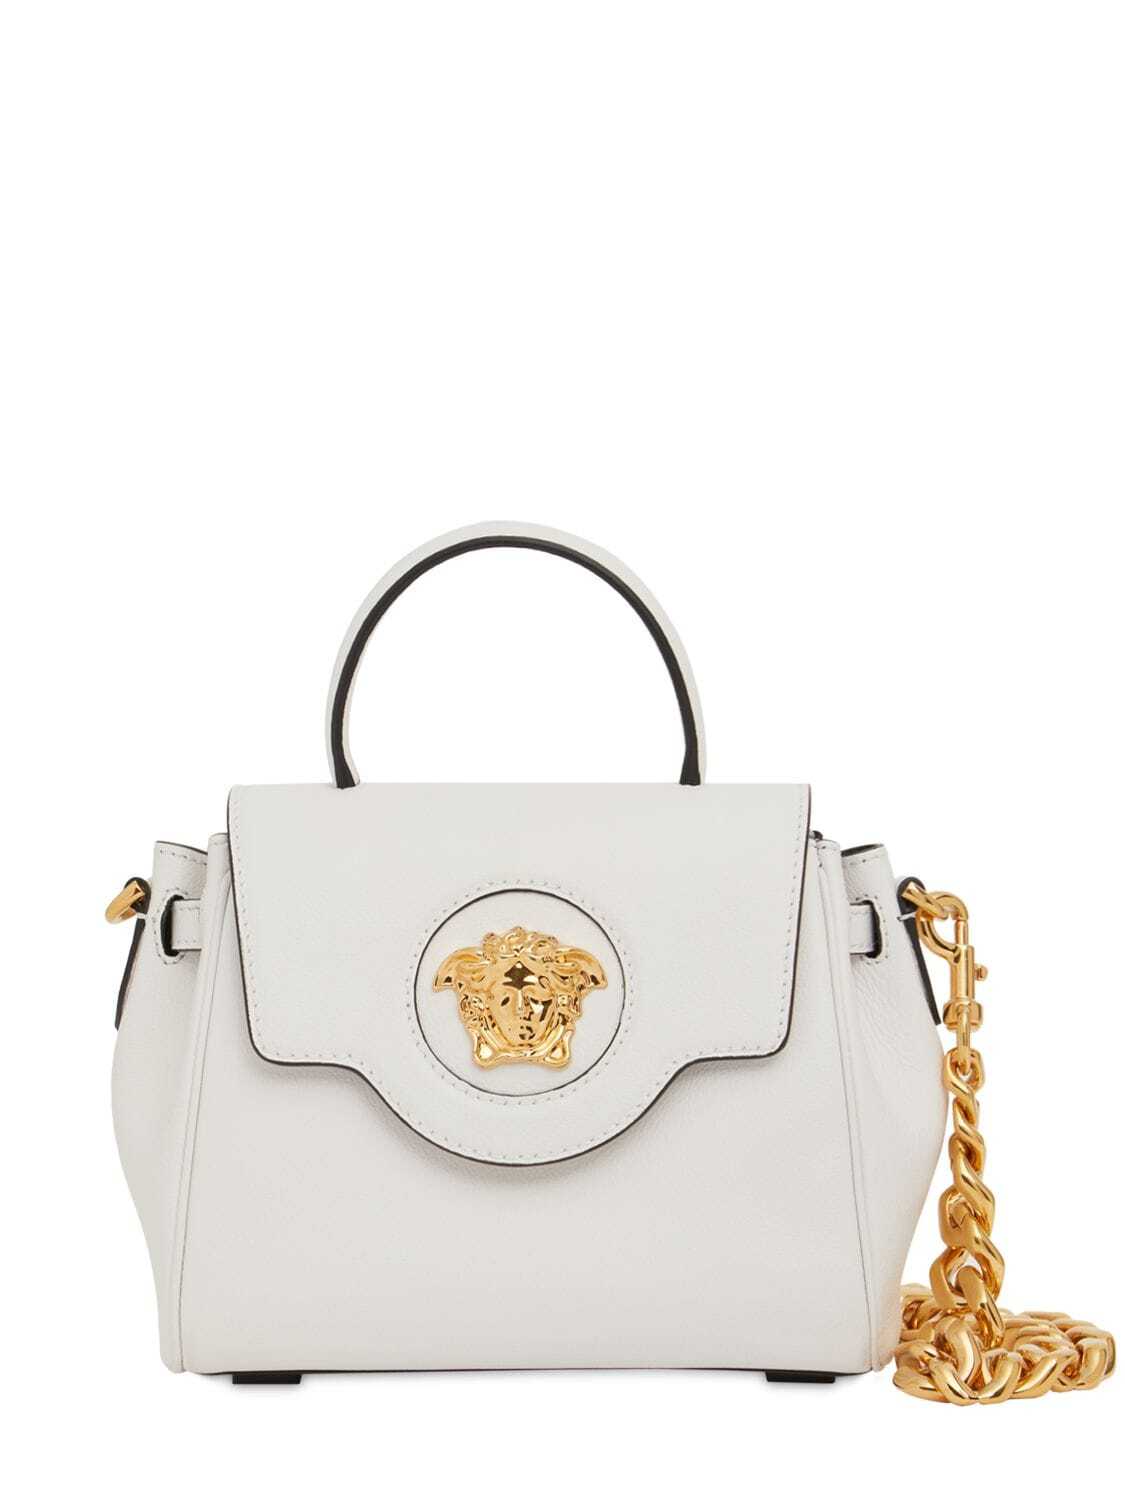 VERSACE Sm Medusa Leather Top Handle Bag in white